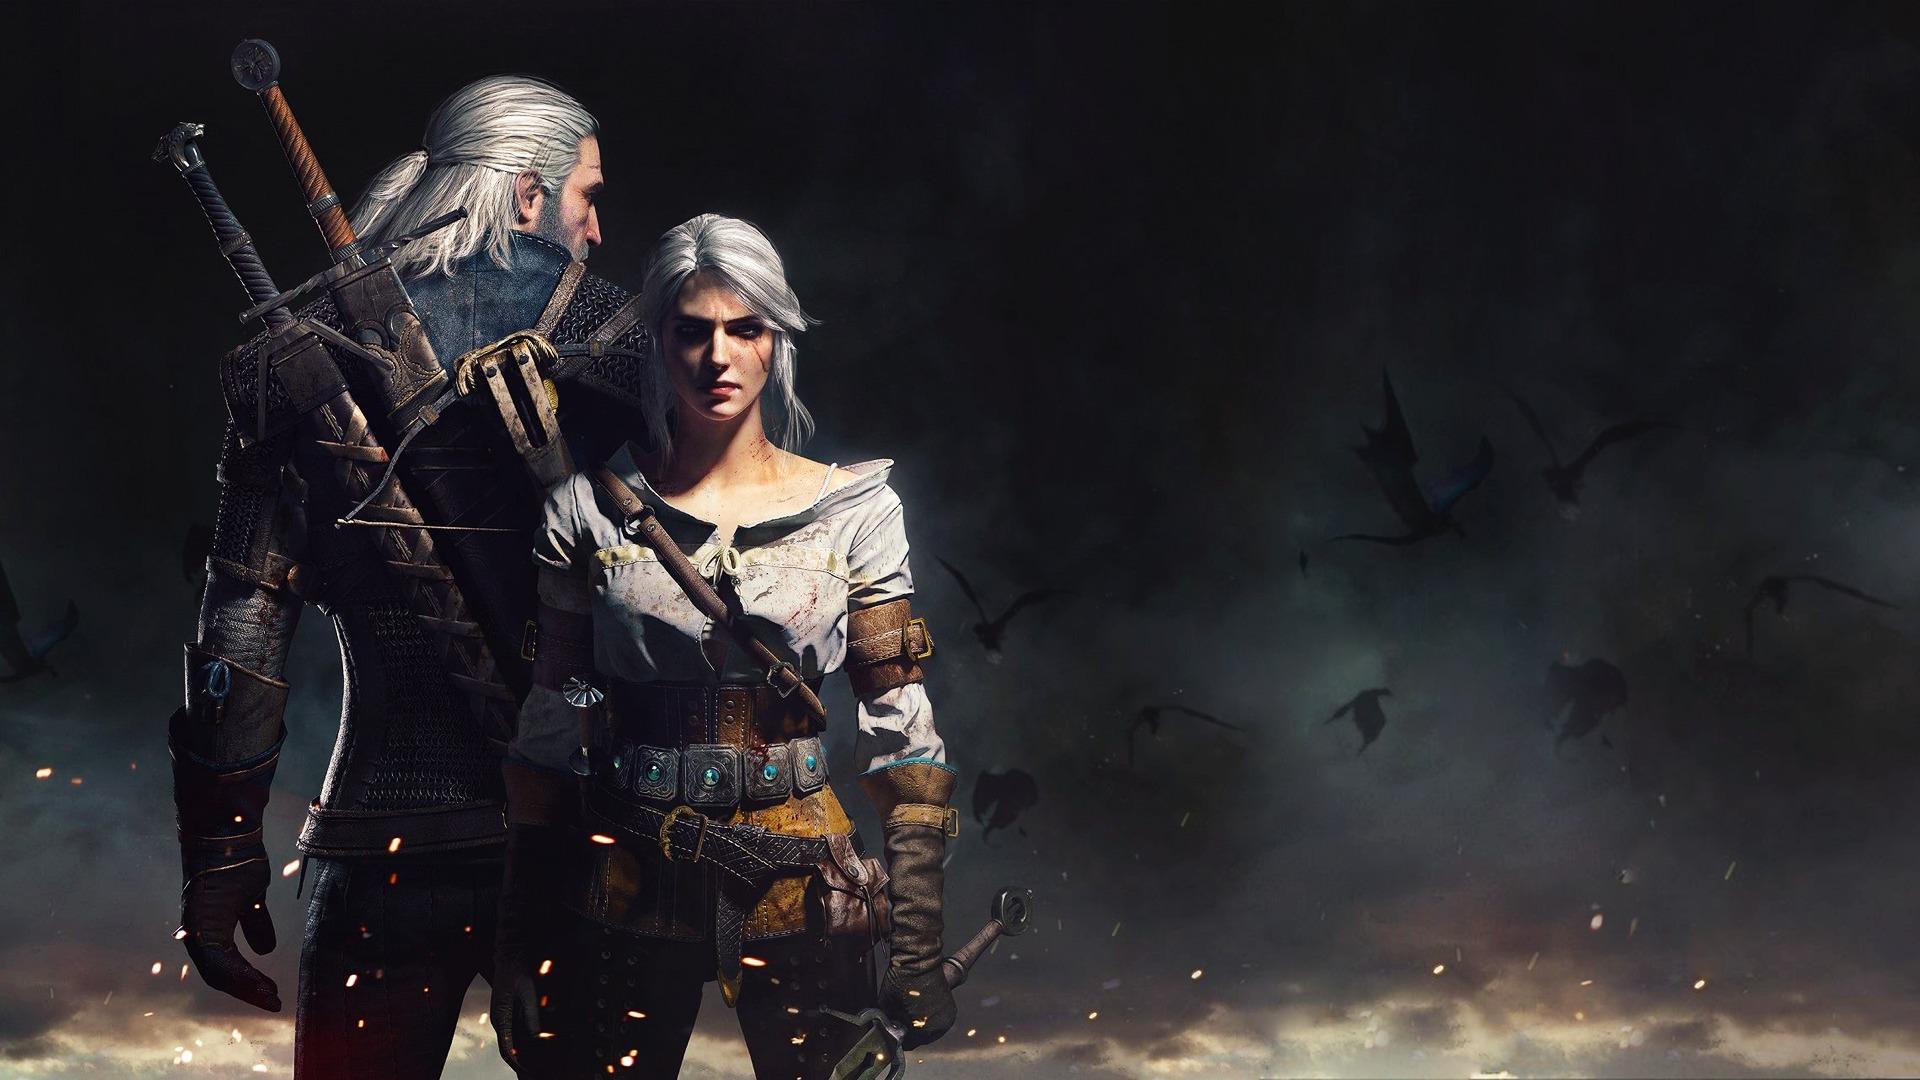 The Witcher Series to Land on Netflix at the End of the Year